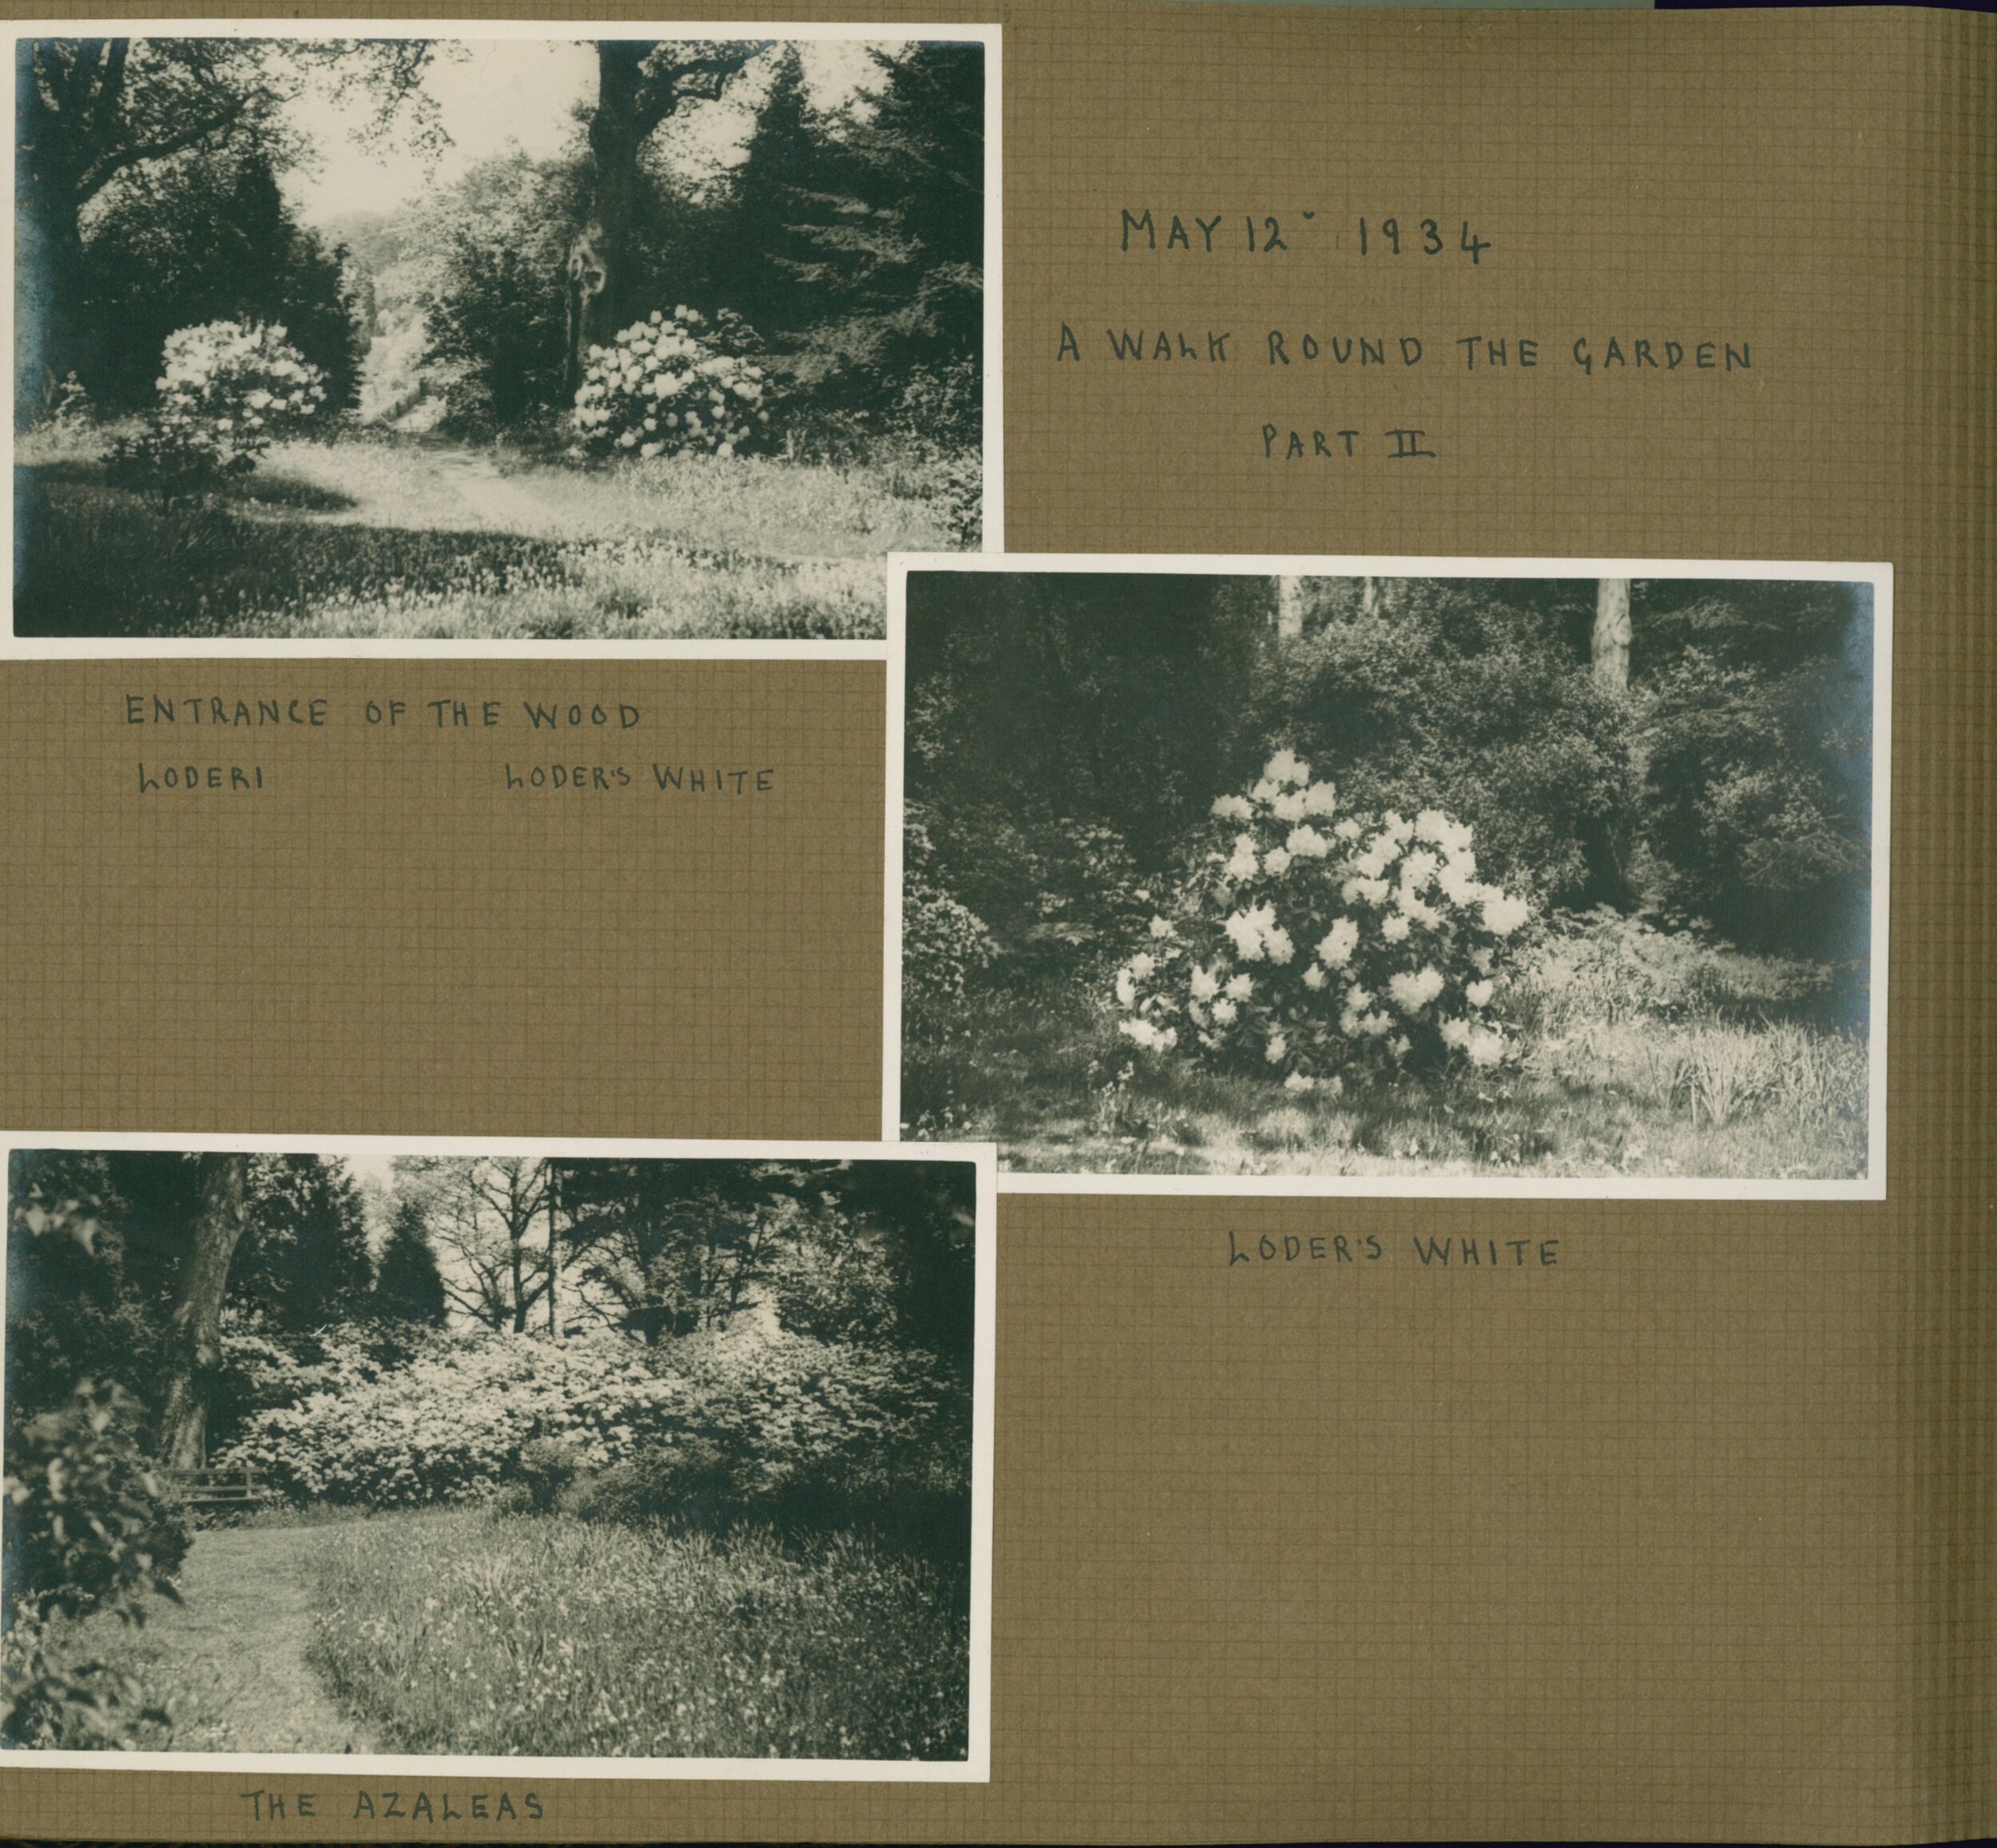 Images of the Wood Garden from 1934